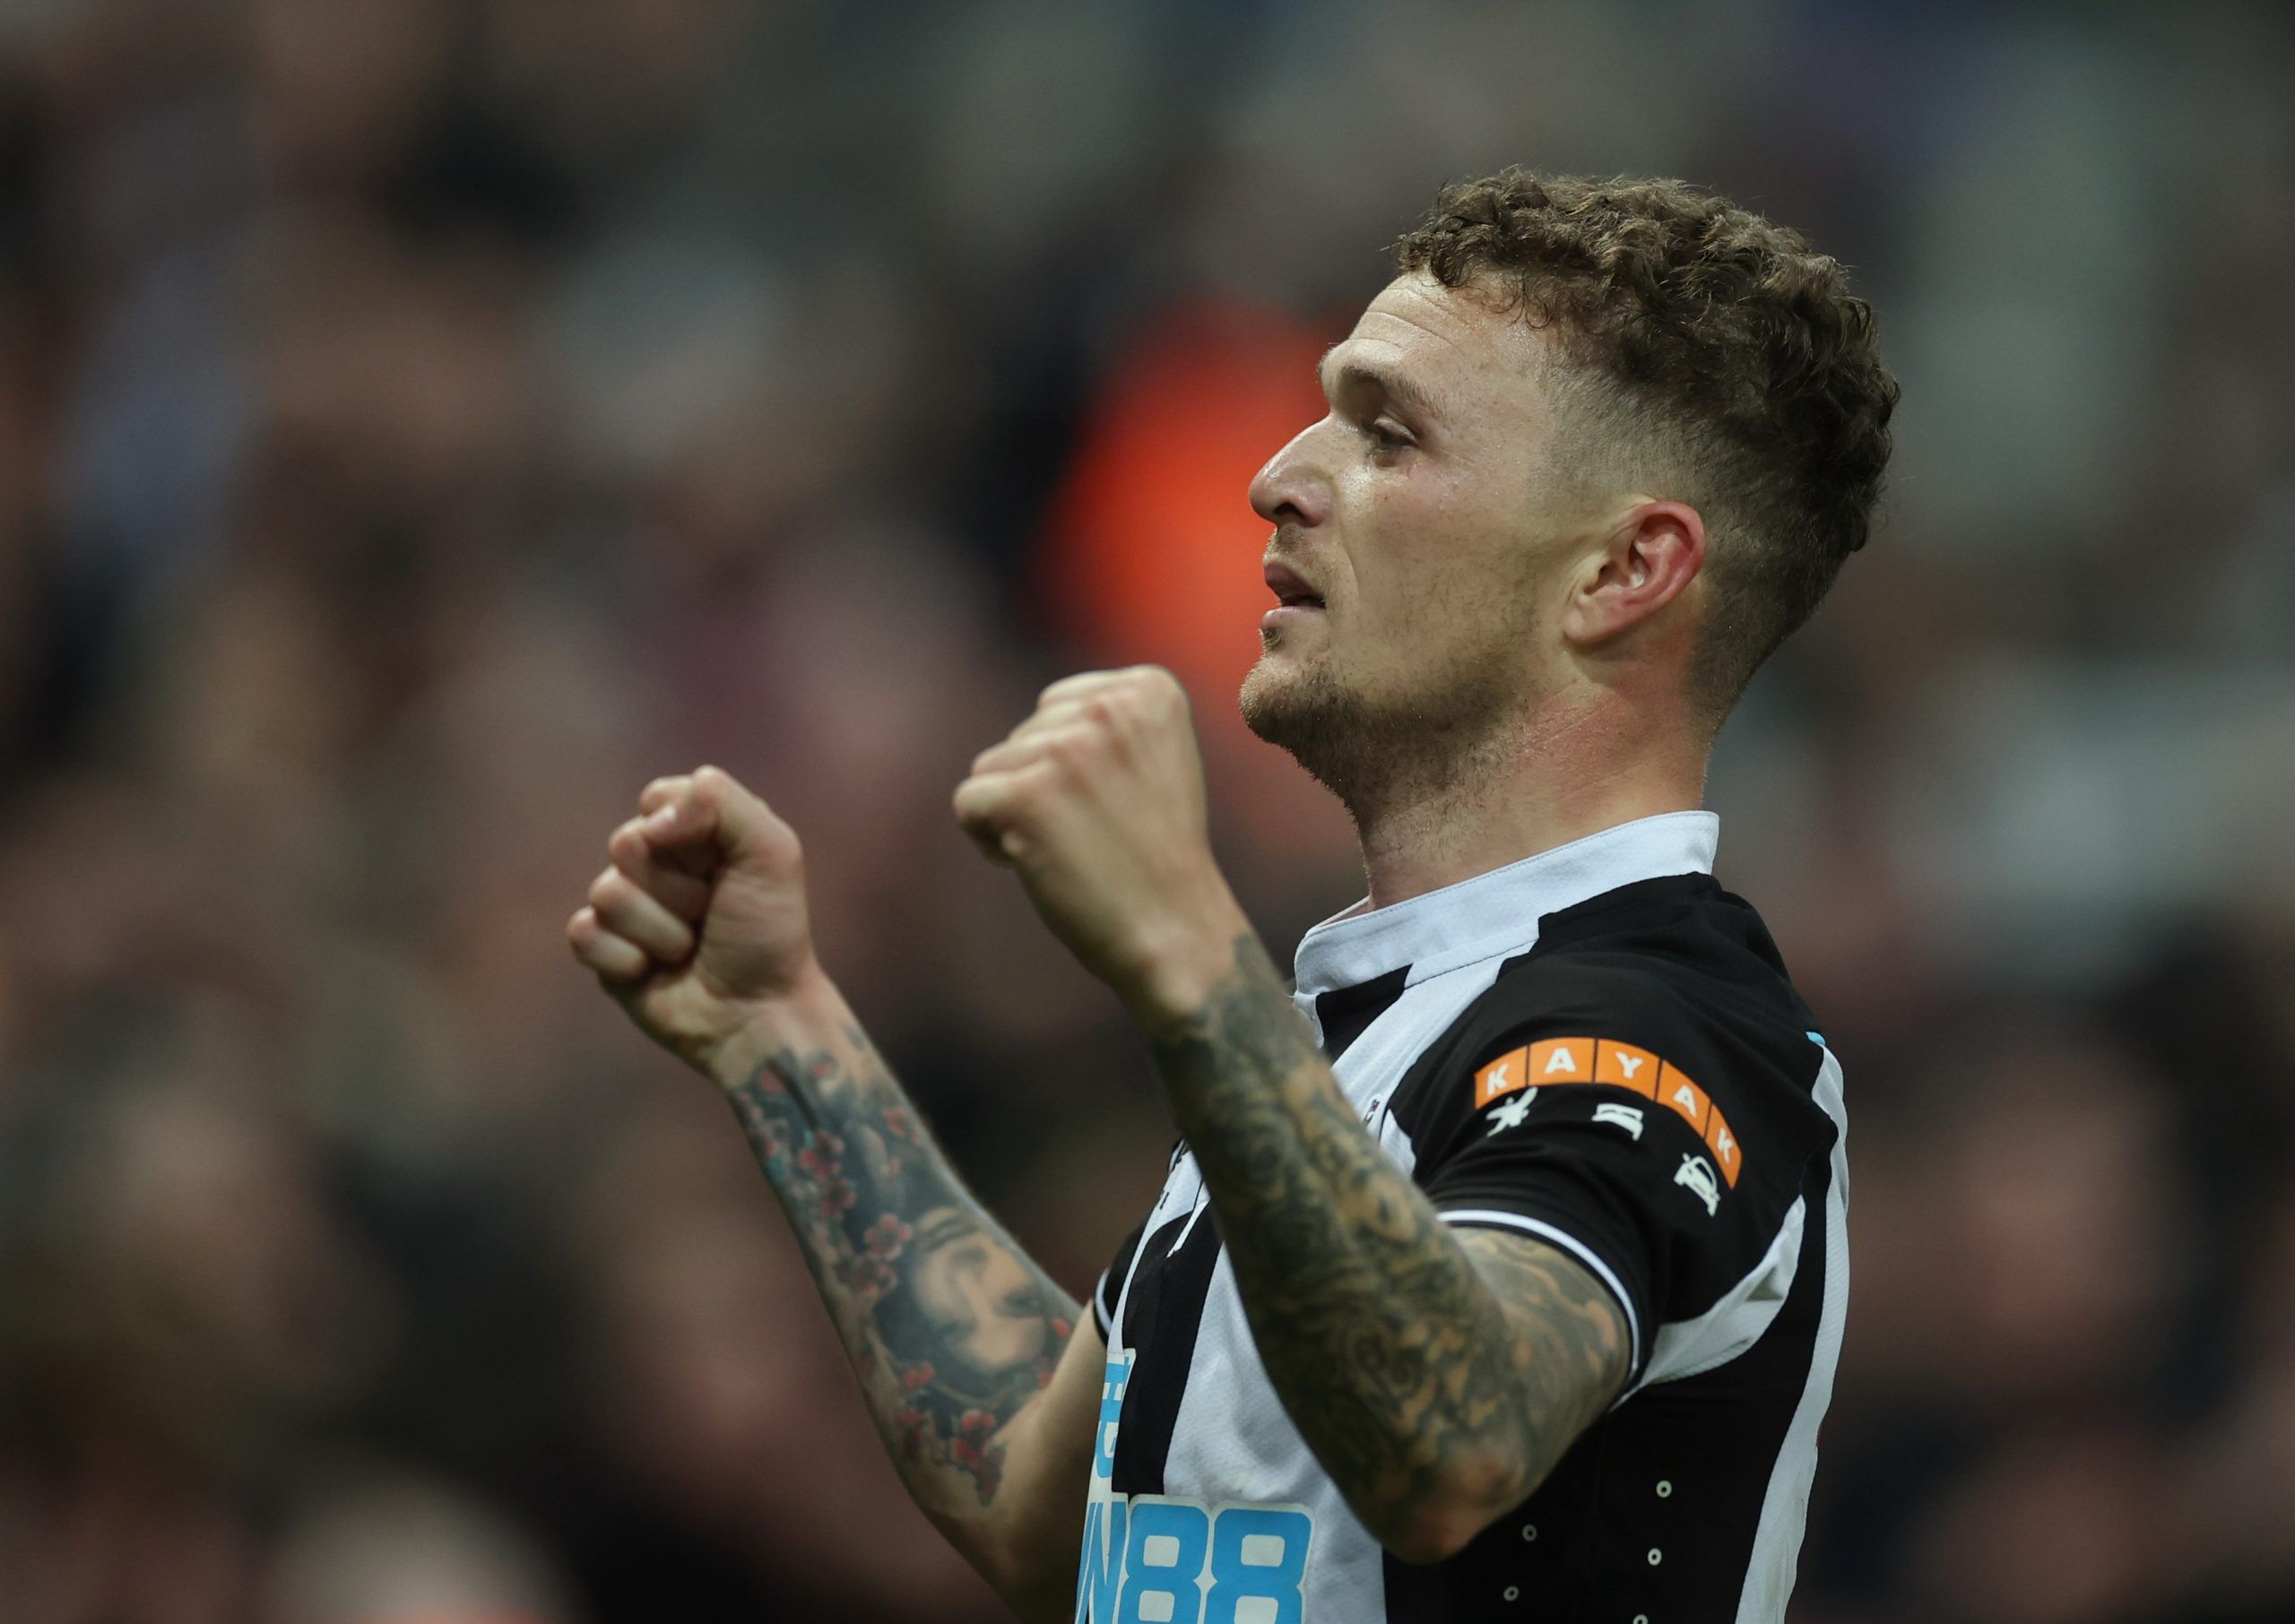 Soccer Football - Premier League - Newcastle United v Everton - St James' Park, Newcastle, Britain - February 8, 2022 Newcastle United's Kieran Trippier celebrates scoring their third goal Action Images via Reuters/Lee Smith EDITORIAL USE ONLY. No use with unauthorized audio, video, data, fixture lists, club/league logos or 'live' services. Online in-match use limited to 75 images, no video emulation. No use in betting, games or single club /league/player publications.  Please contact your accou